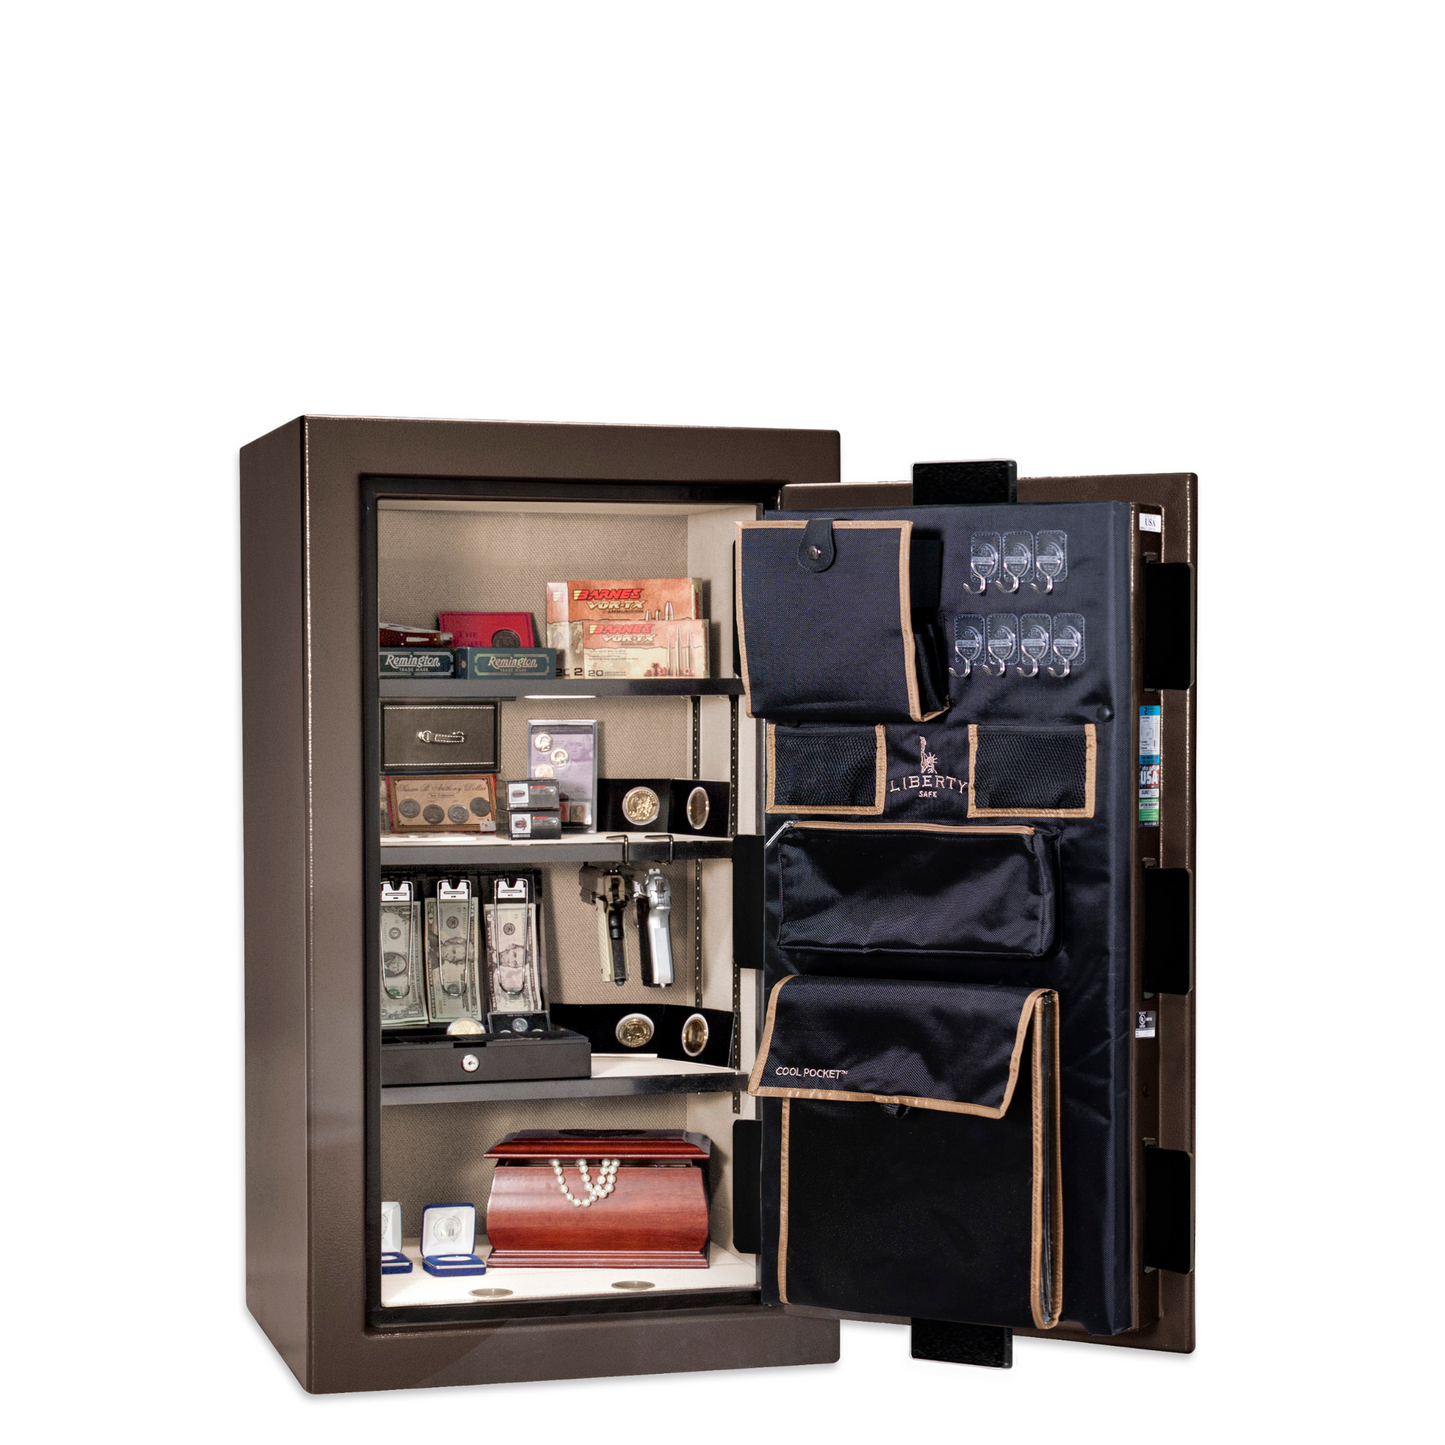 Premium Home Series | Level 7 Security | 2 Hour Fire Protection | 12 | Dimensions: 41.75"(H) x 24.5"(W) x 19"(D) | Bronze Gloss - Open Door